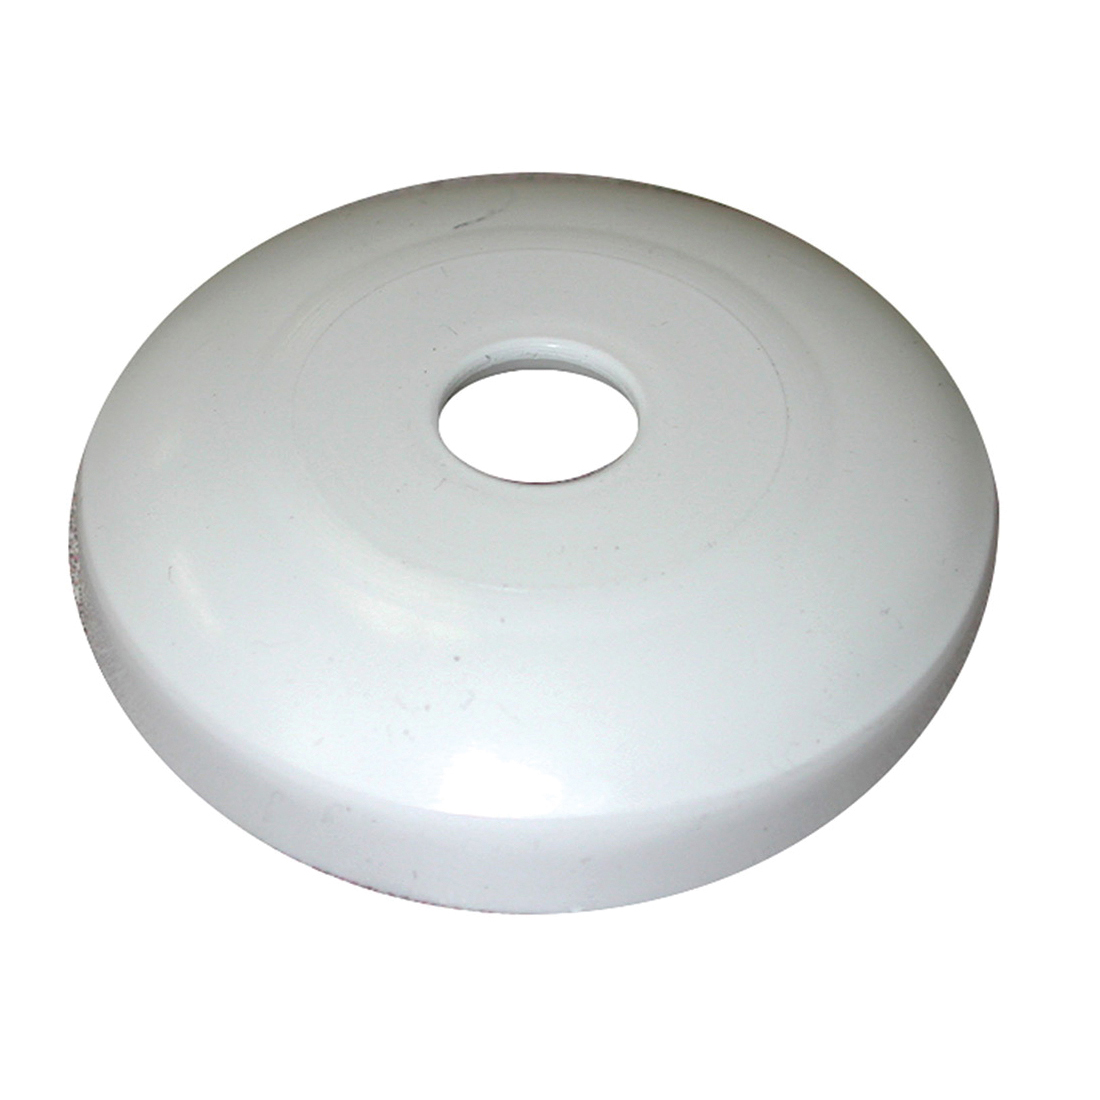 Jones Stephens™ E16075 Escutcheon Shallow Flange, IPS Connection, Fits Pipe Size: 3/4 in, HDPE, White